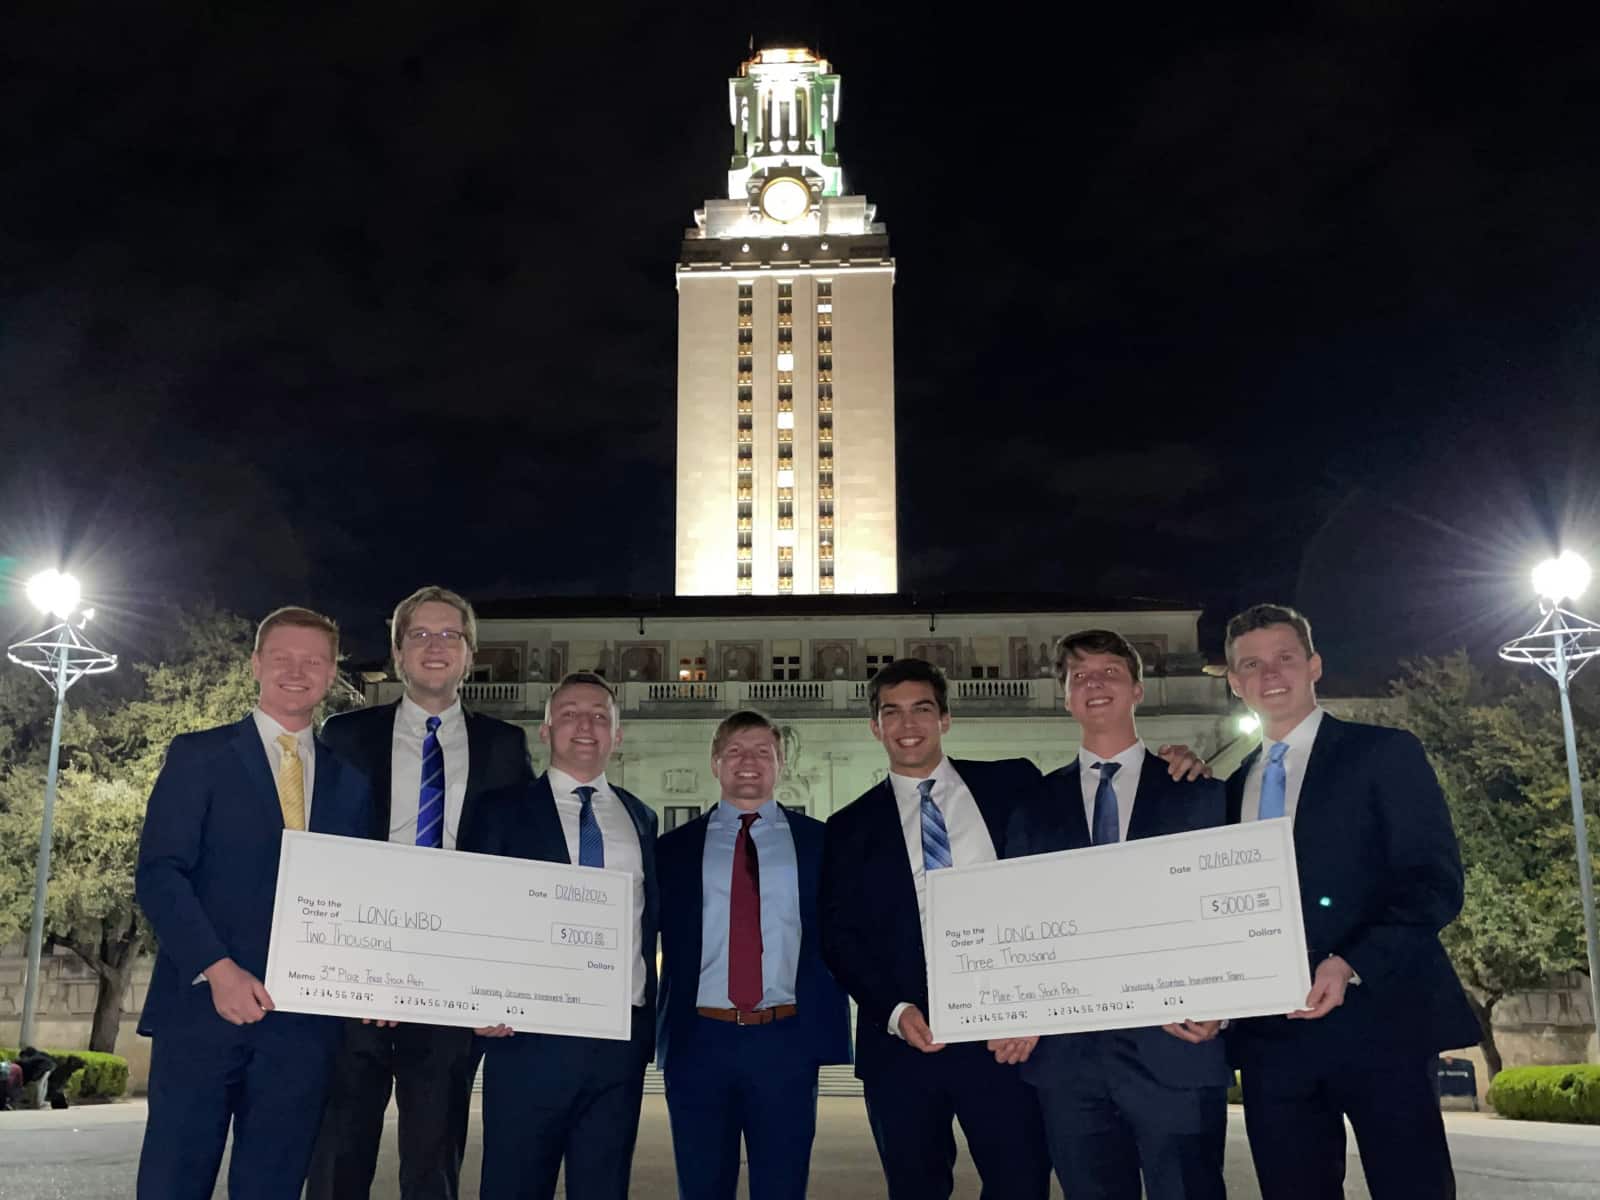 Seven students hold two large checks from a stock competition outside at night